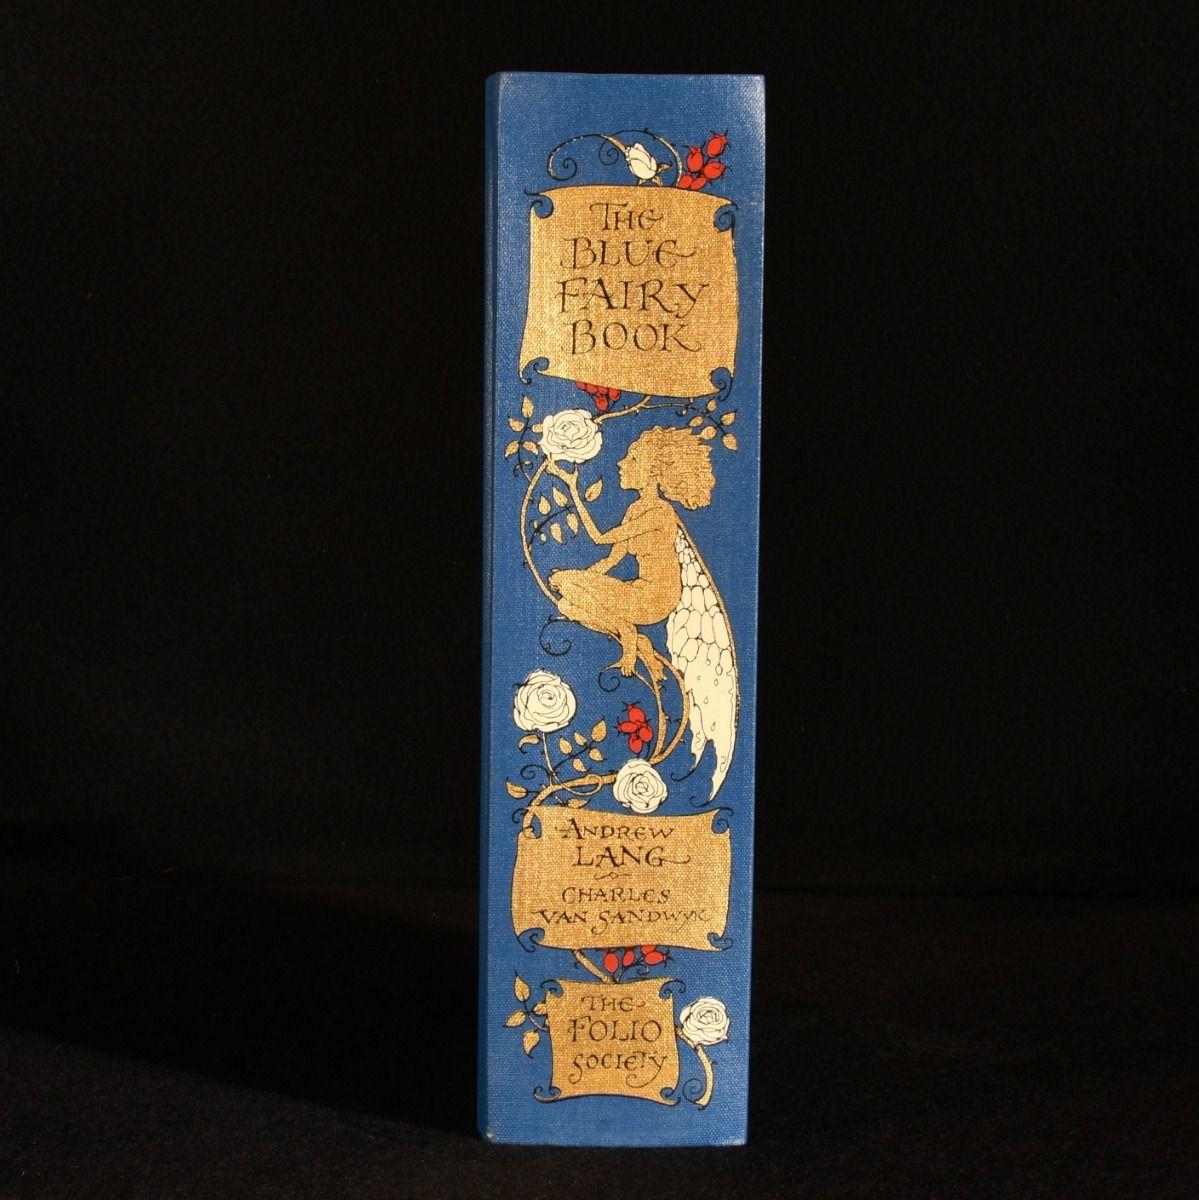 A very smart Folio Society edition of Andrew Lang's important collection of fairy tales, a beautiful and colourfully illustrated edition.

In the original slipcase, in a near fine condition.

A smart Folio Society edition of this important